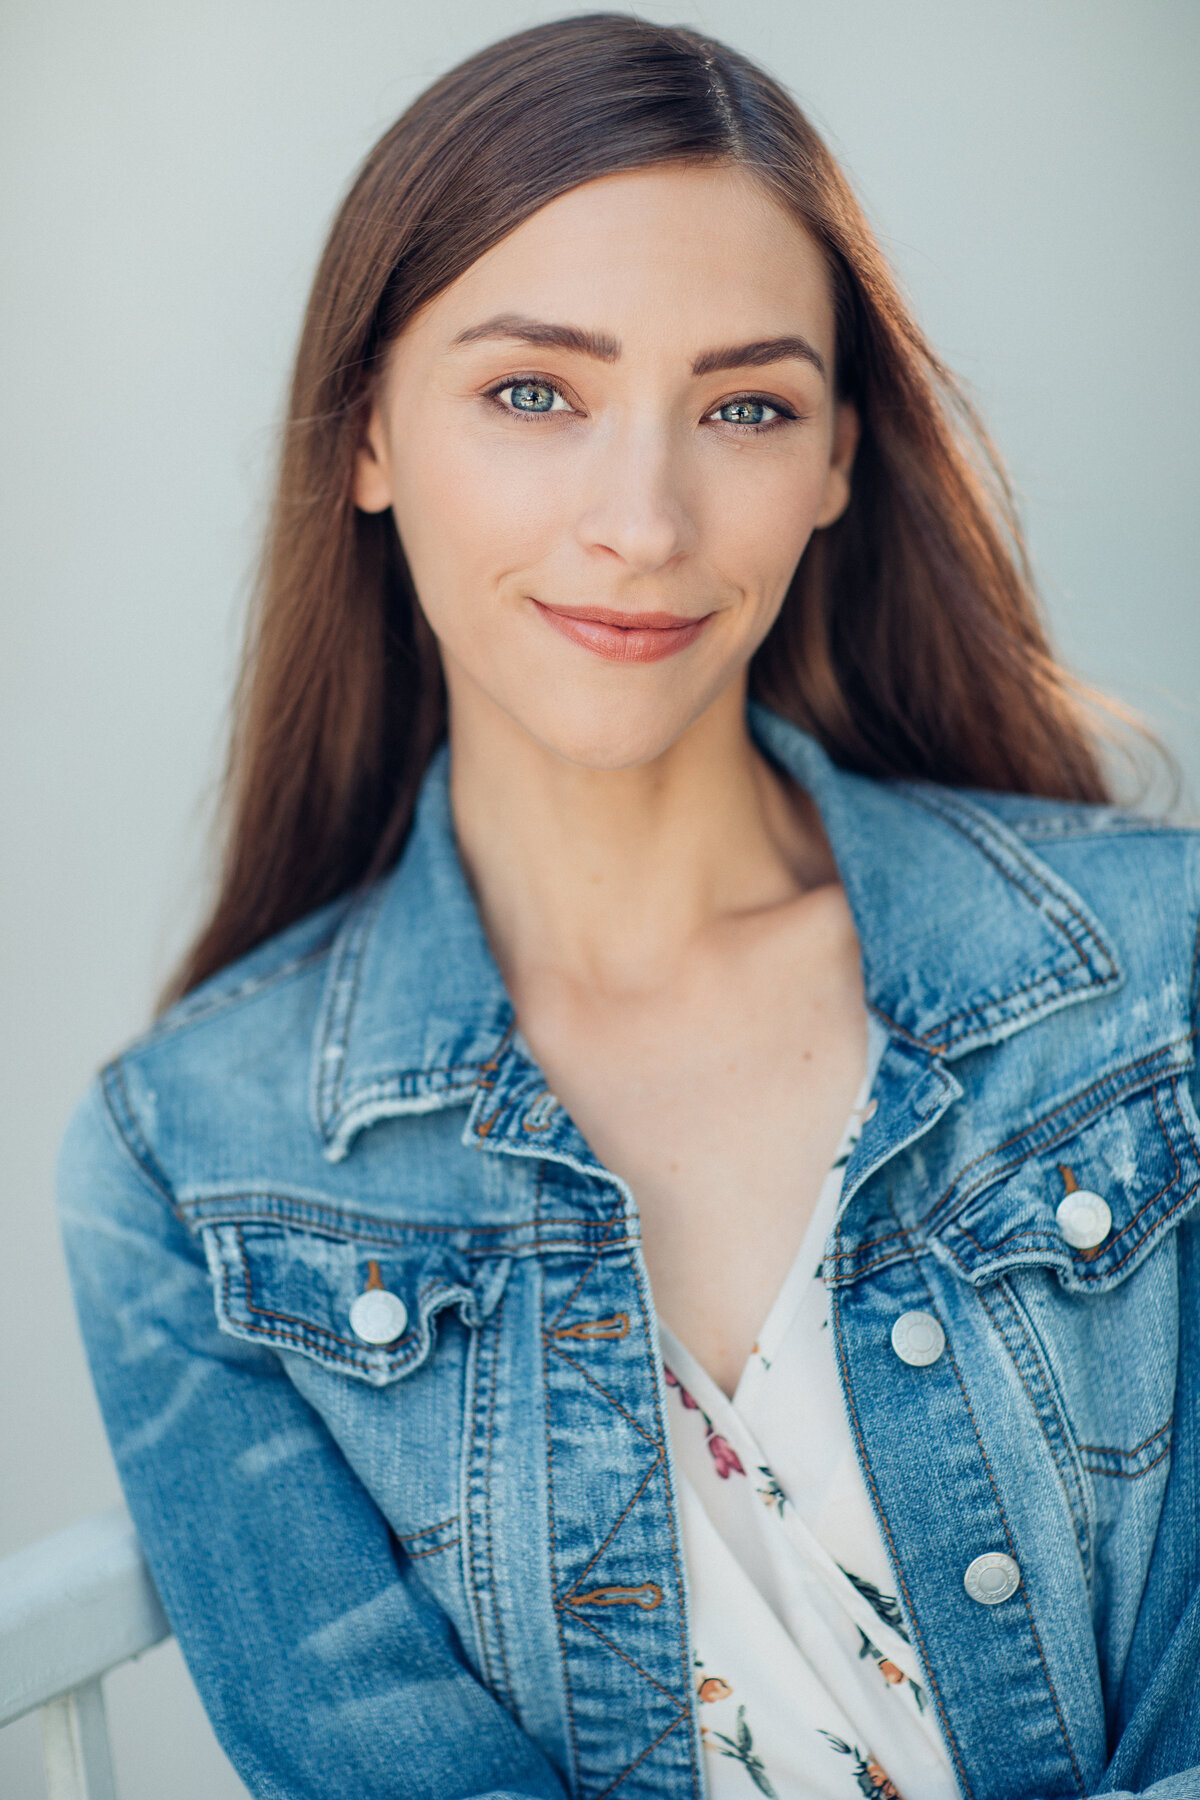 Headshot Photograph Of Young Woman In Outer Faded Blue Denim Jacket And Inner Floral Blouse Los Angeles